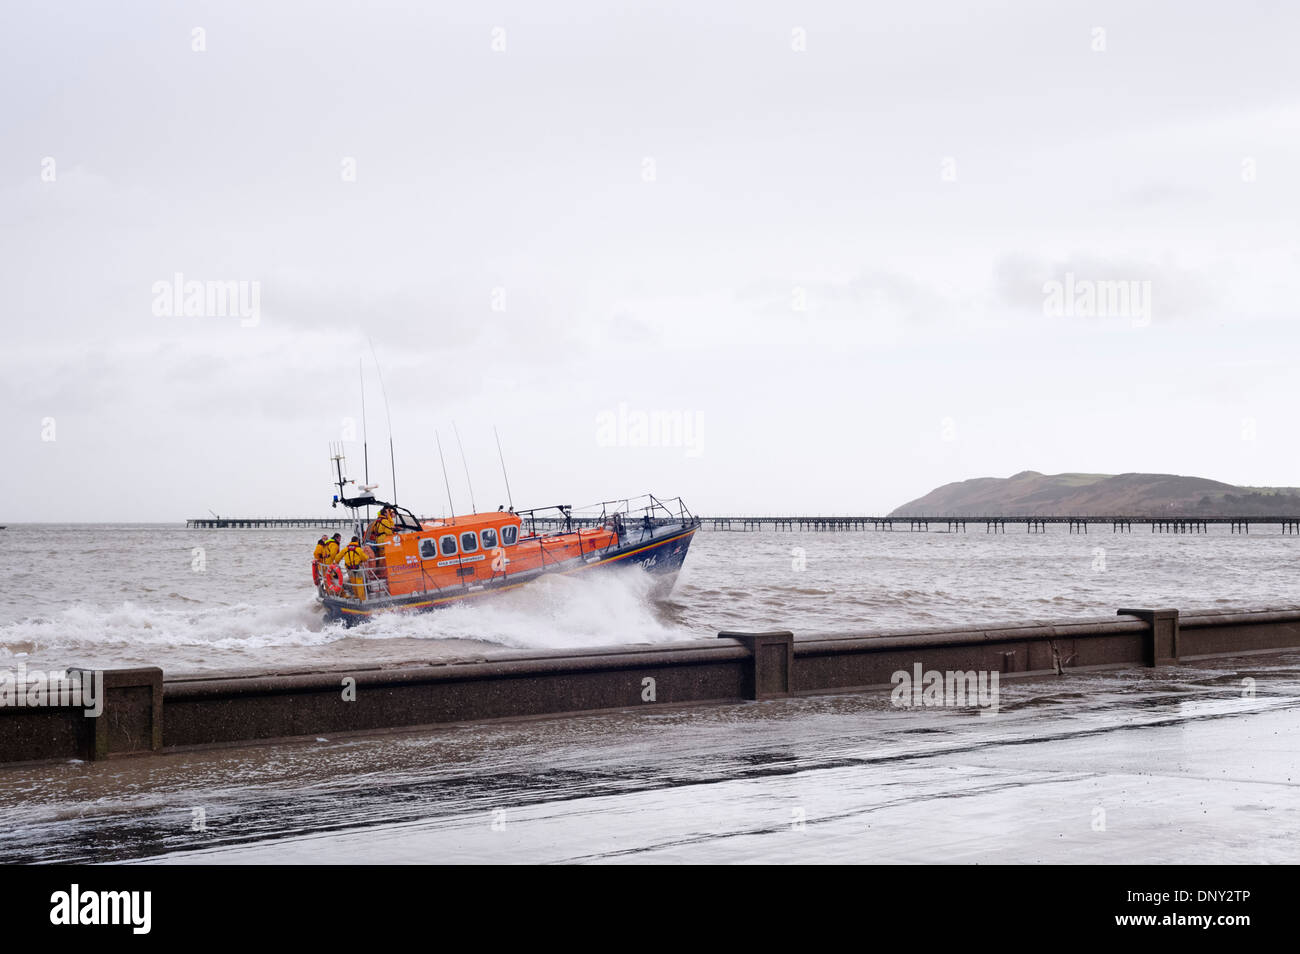 Ramsey, Isle of Man - RNLB Mersey-class relief Lifeboat Royal Shipwright at sea during an exceptionally high tide. Stock Photo